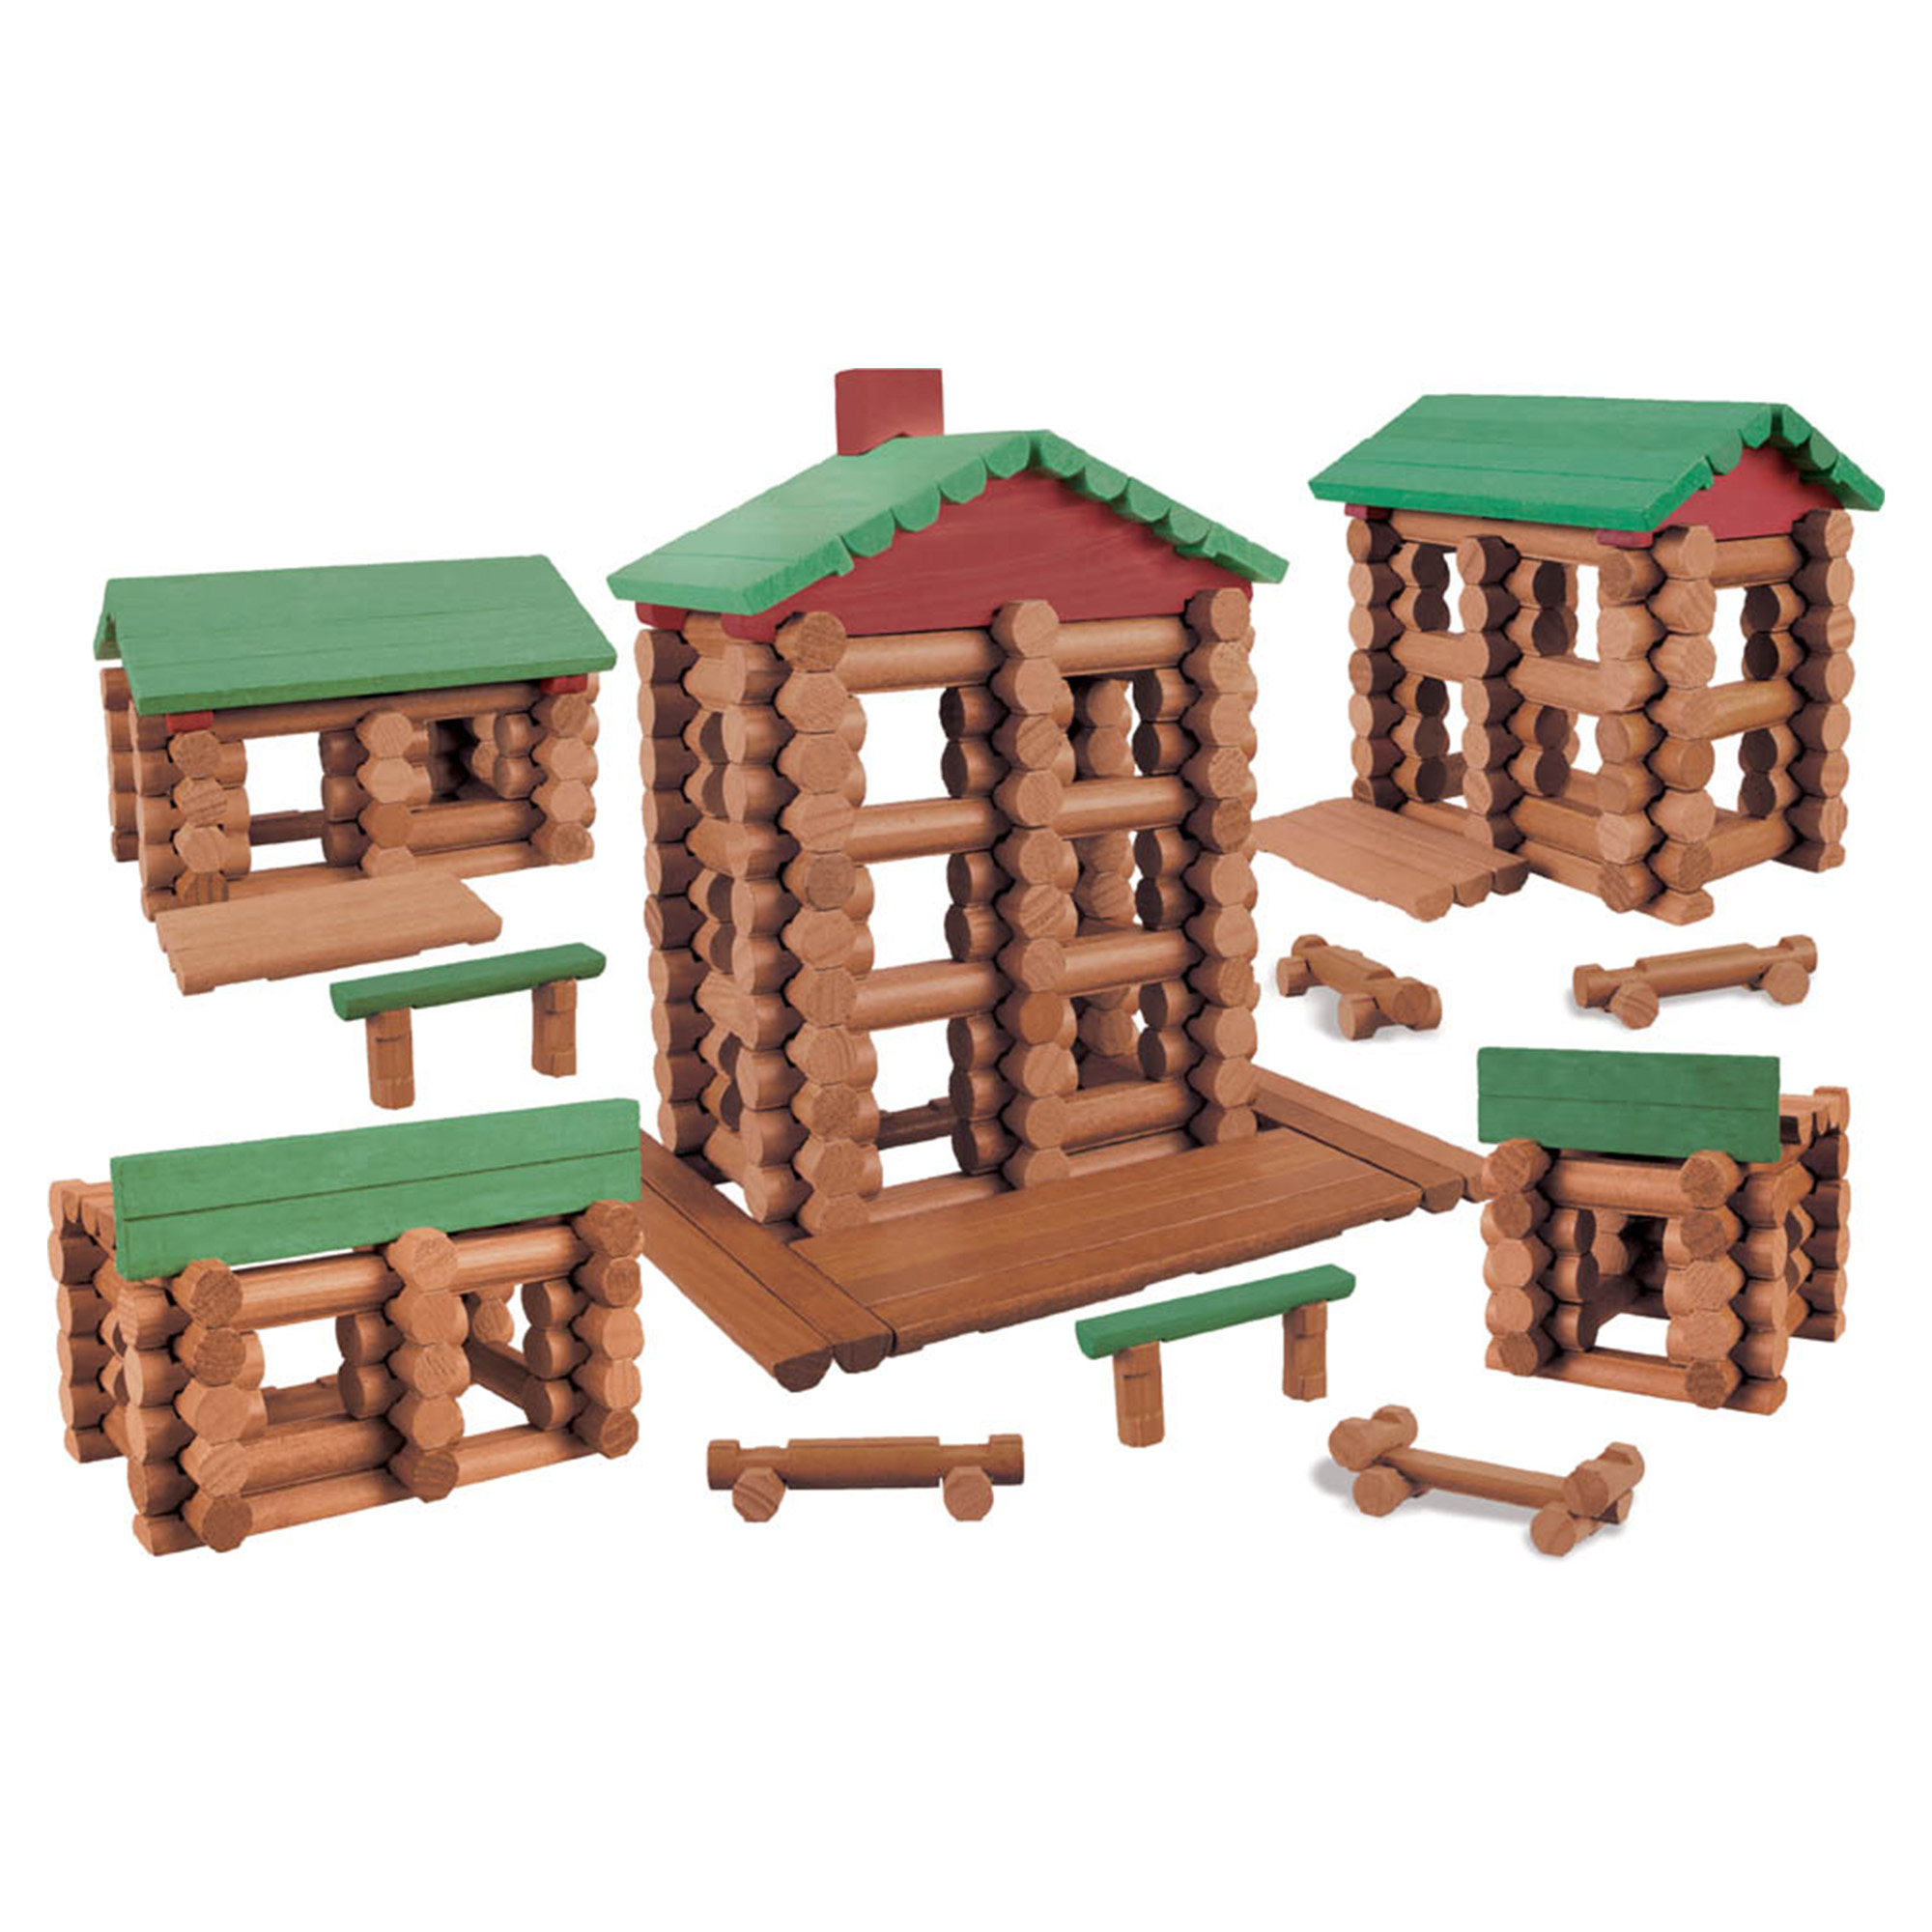 Lincoln Logs collectors edition houses